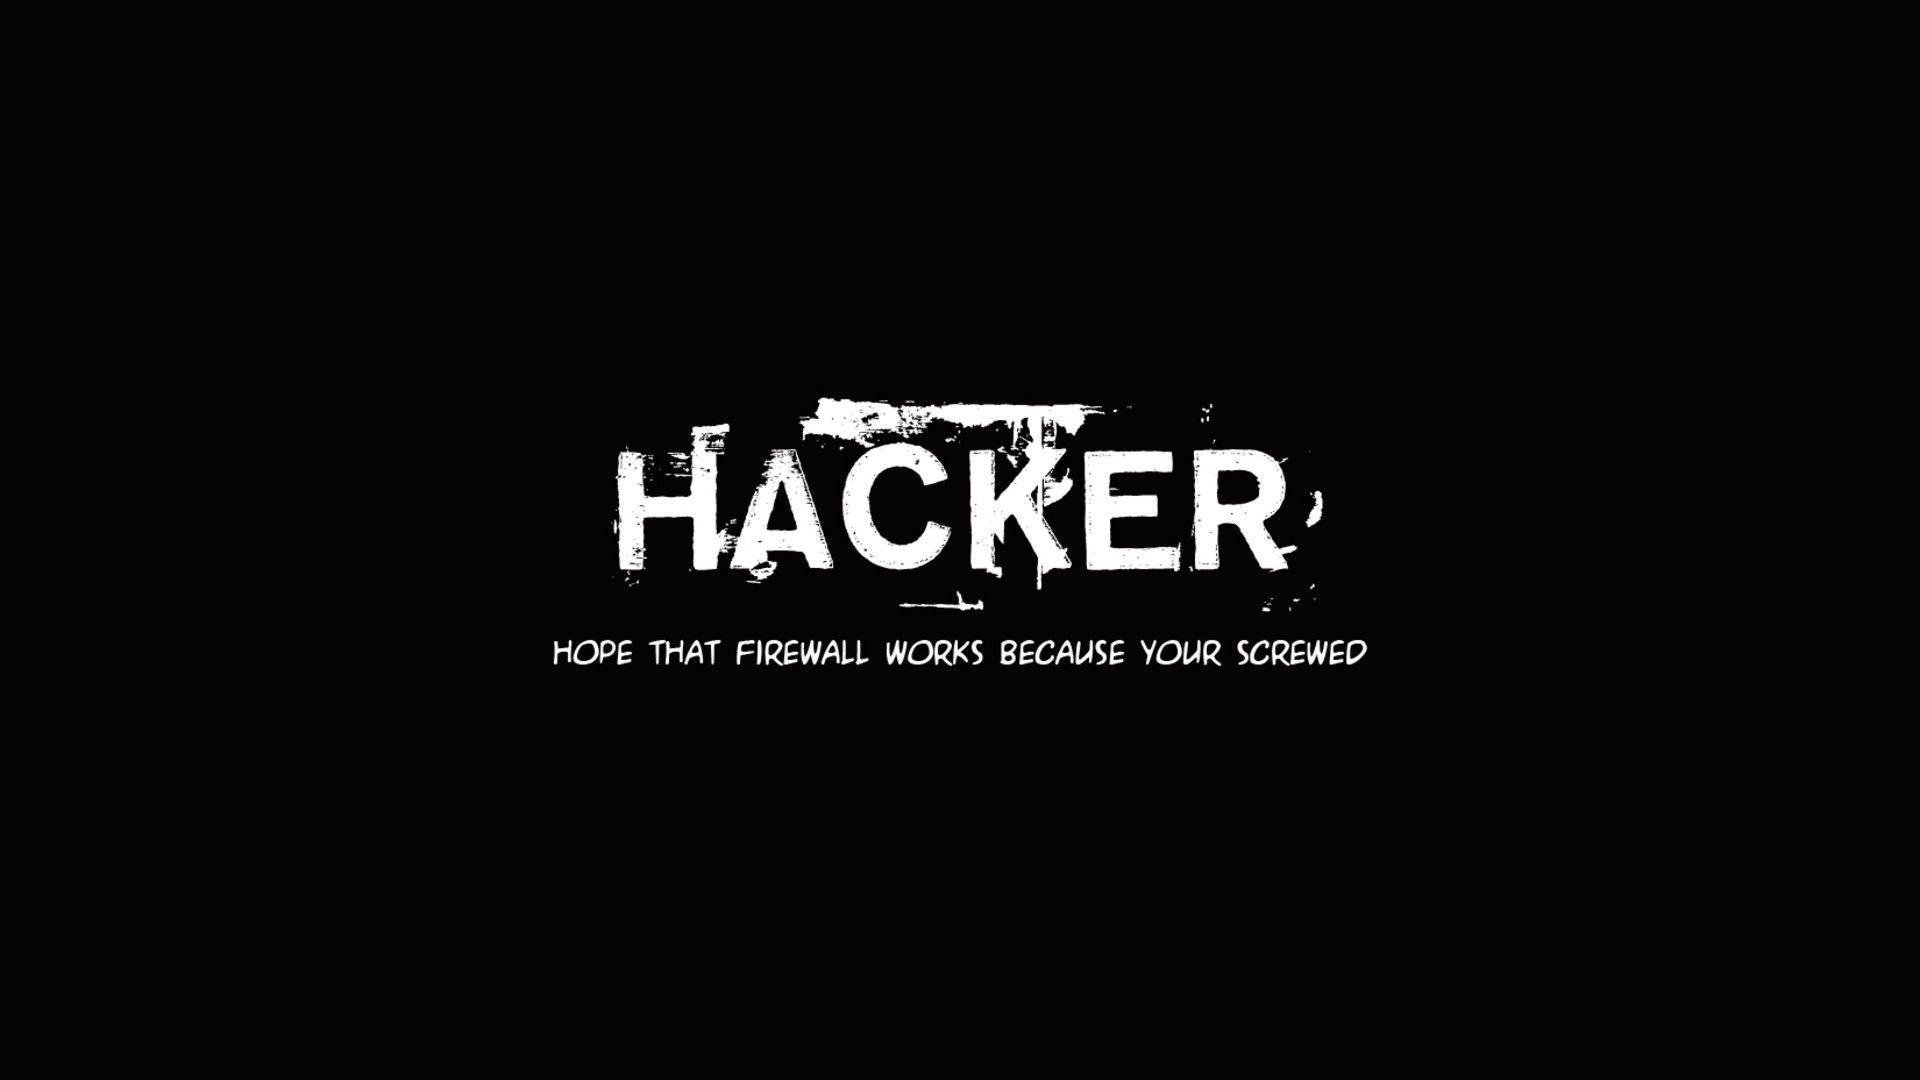 Funny Hacker Wallpapers / Wallpapers Funny 74335 high quality